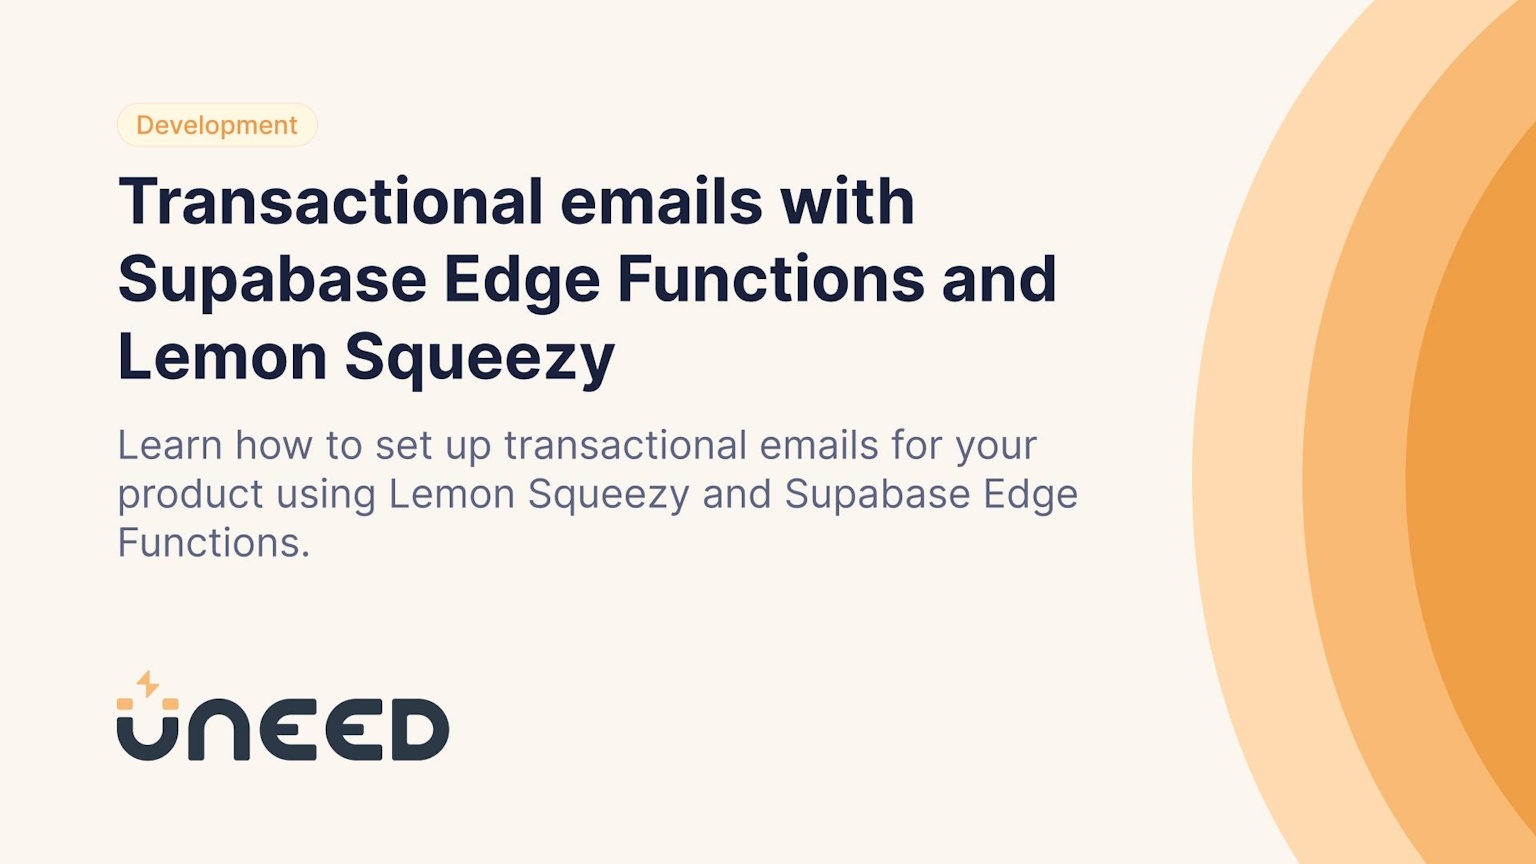 Transactional emails with Supabase Edge Functions and Lemon Squeezy